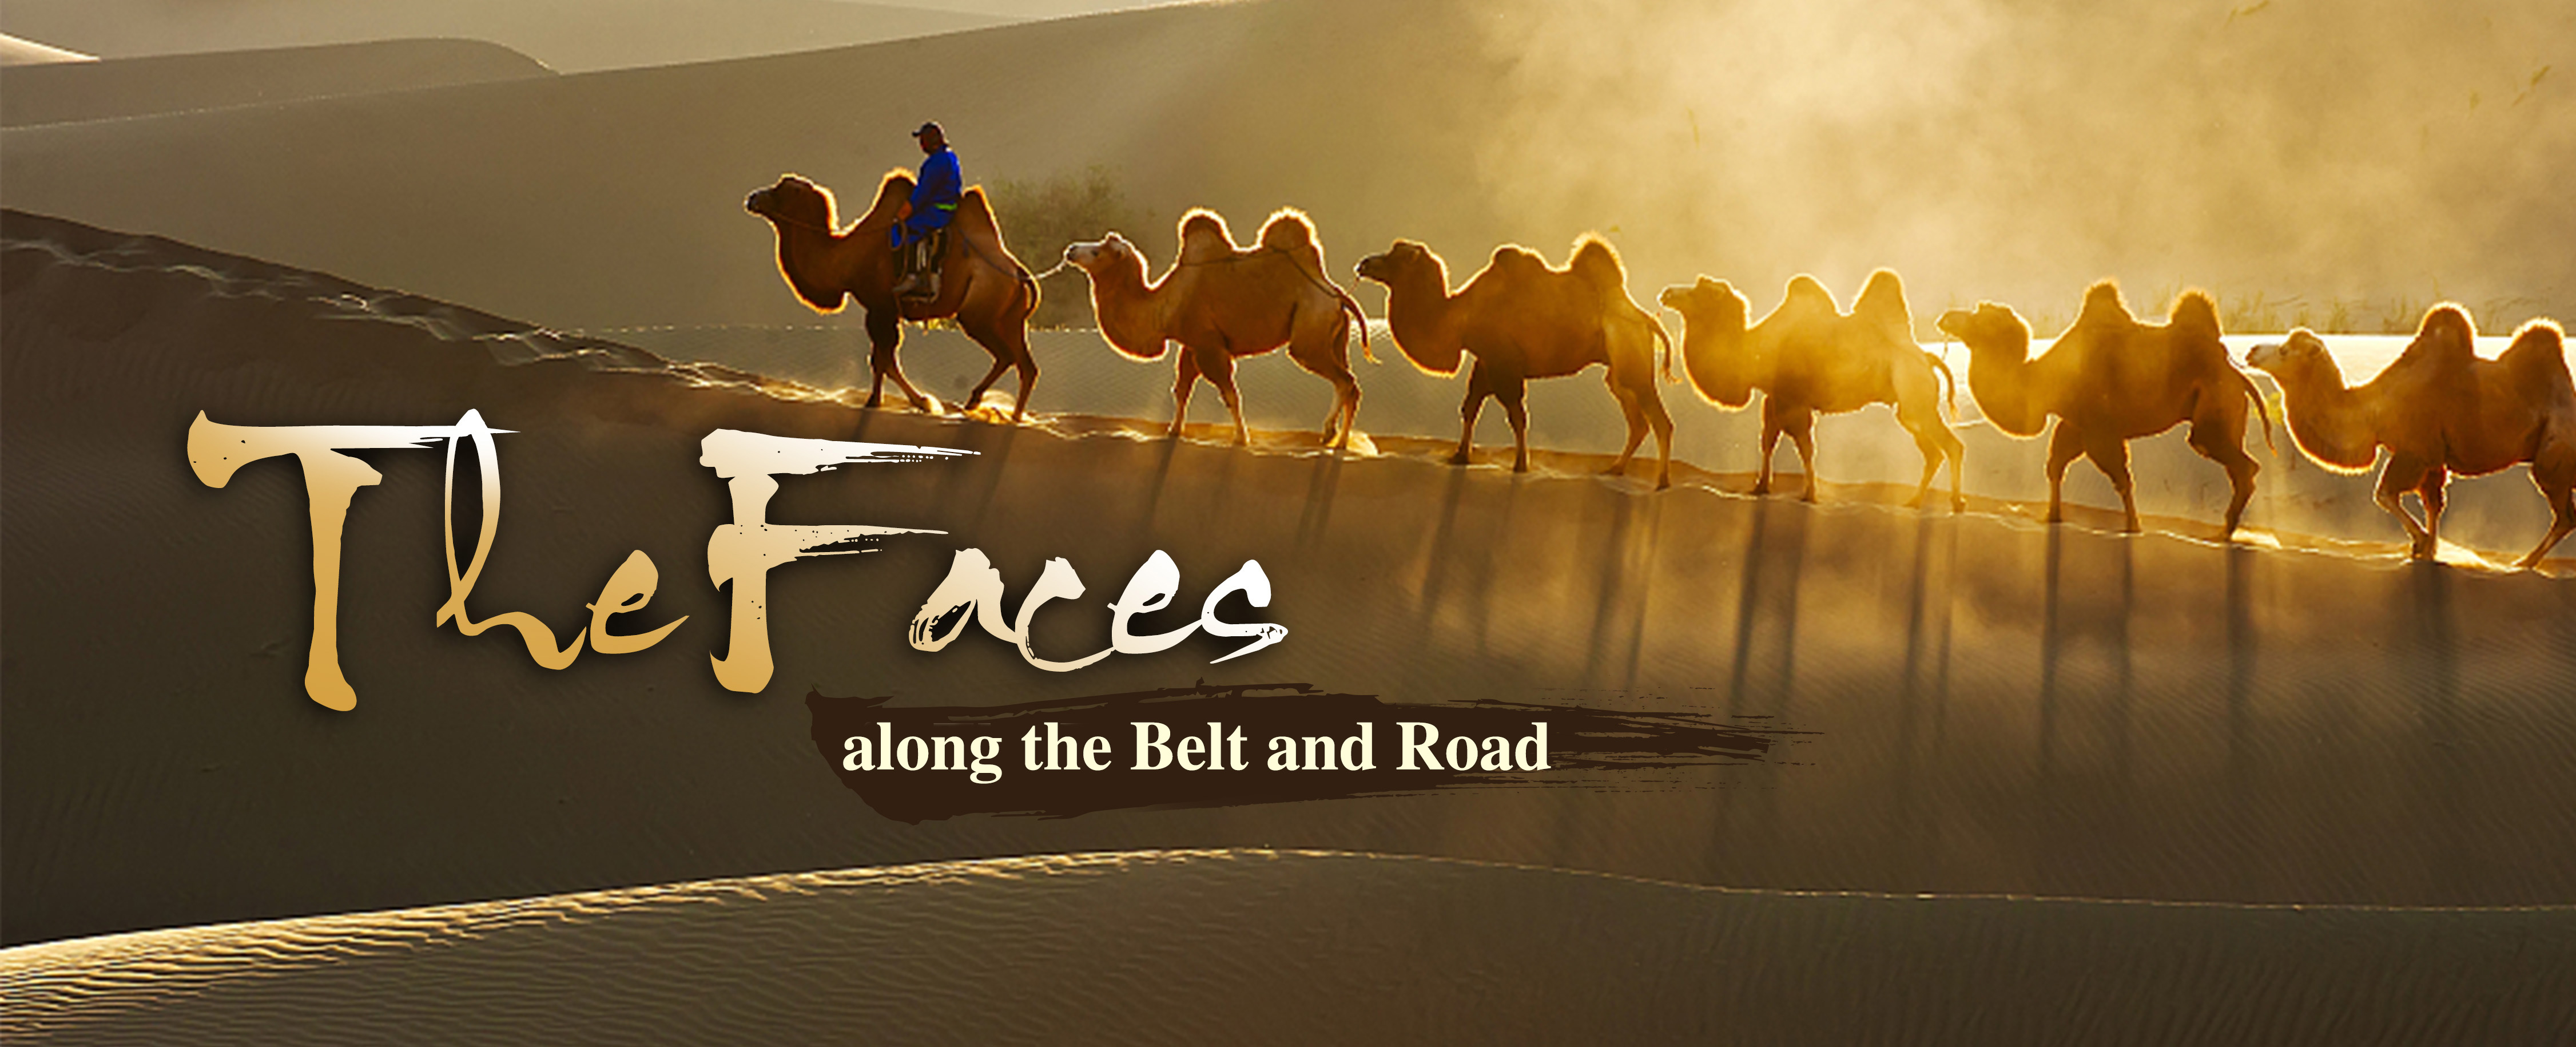 The Faces along the Belt and Road